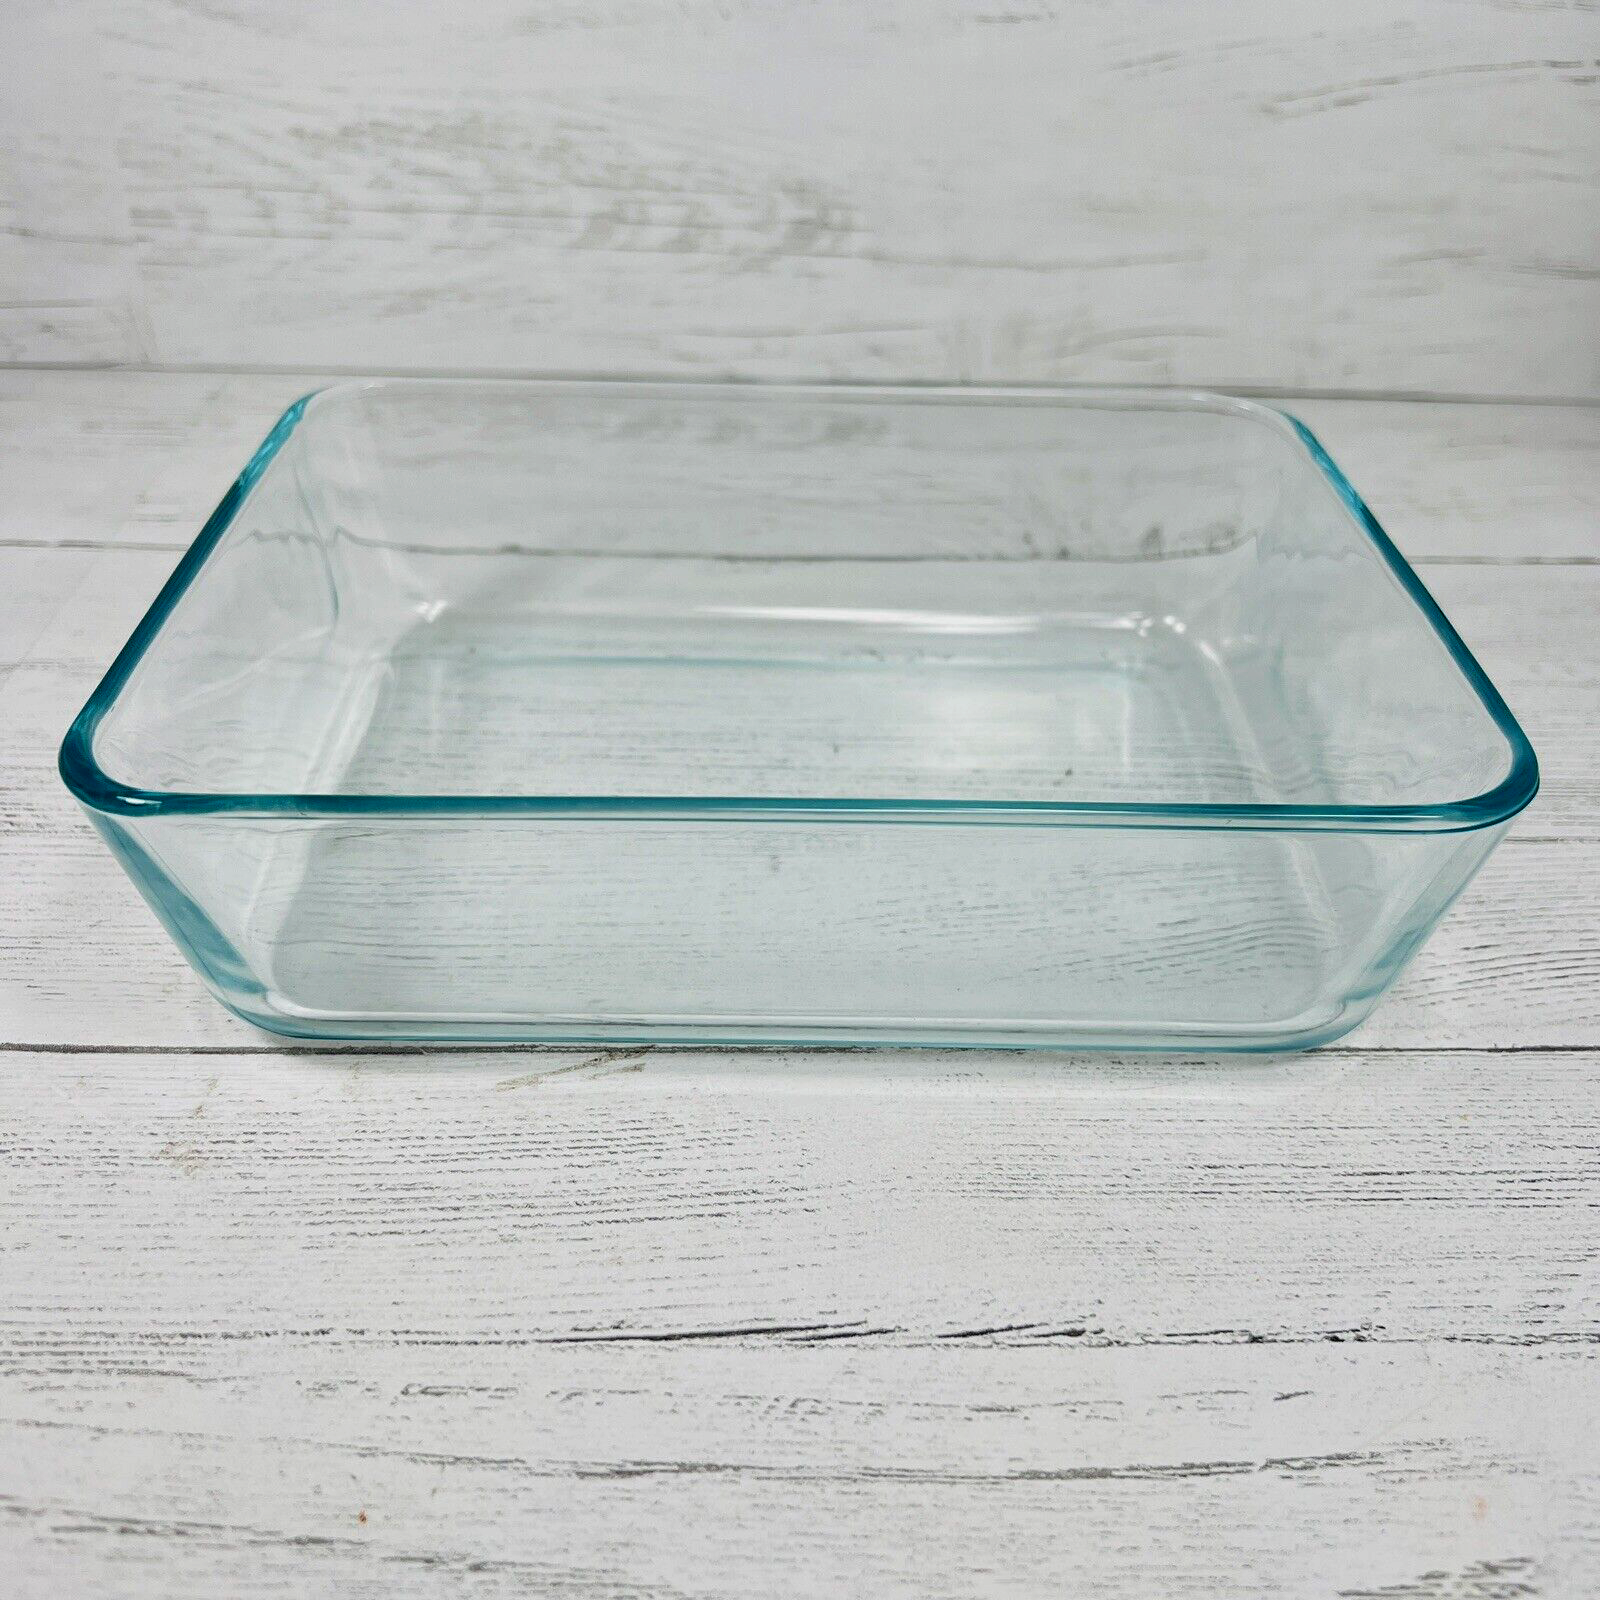 Primary image for Vintage Pyrex Casserole Glass Dish 7211 1.5L 8x6x2 Inches Clear Blue Tint